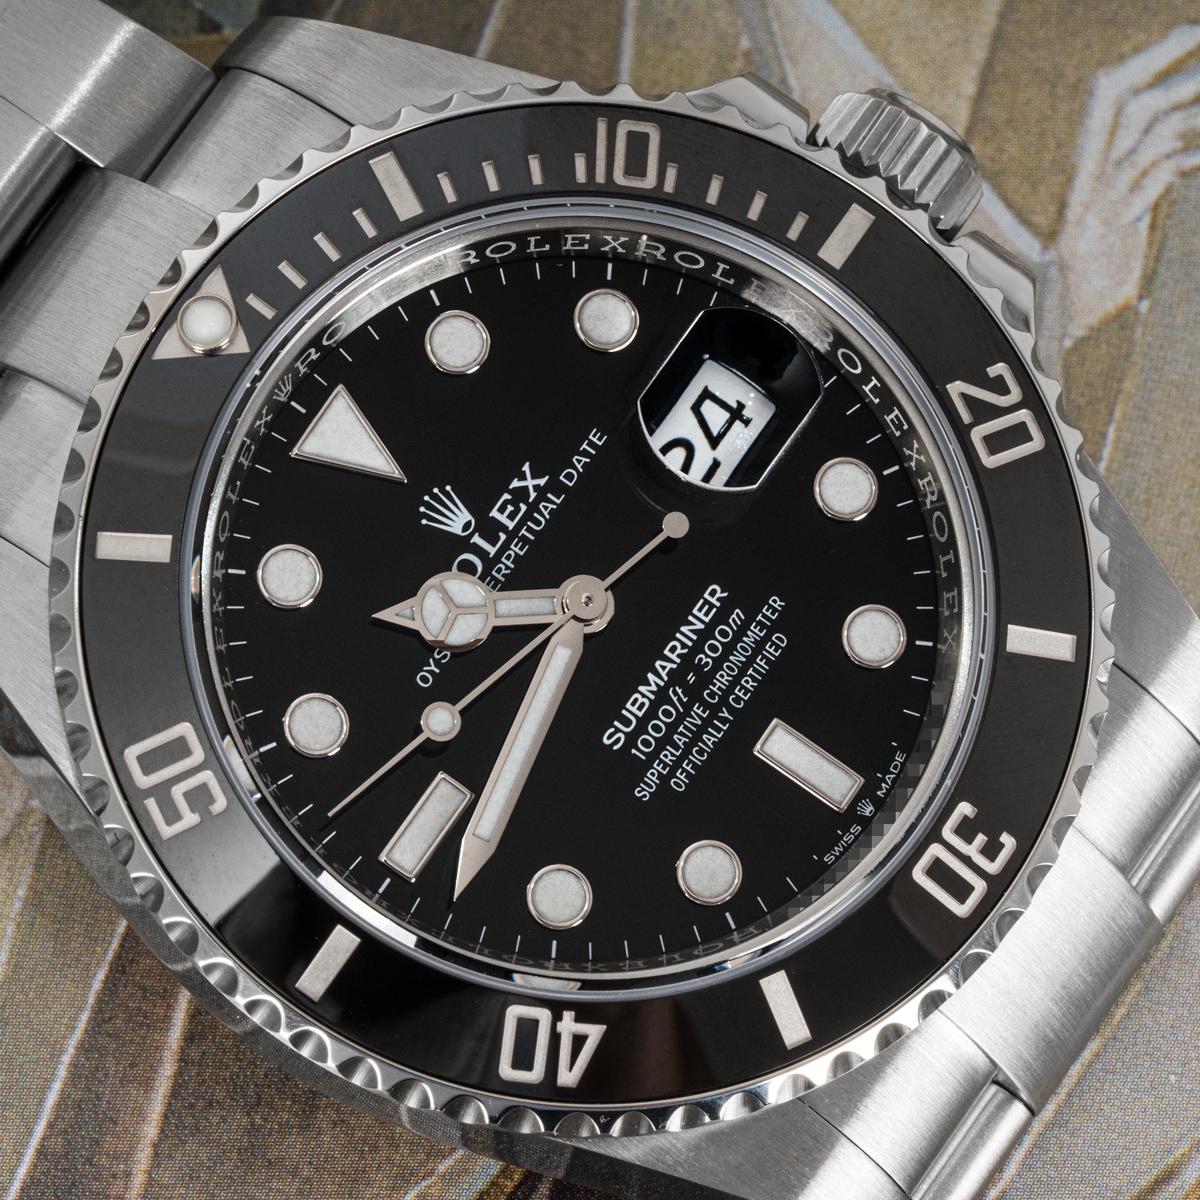 An unworn 41mm Submariner Date in Oystersteel by Rolex. Featuring a black dial, complemented by a black ceramic unidirectional rotatable bezel with 60-minute graduations coated in platinum.

Fitted with a scratch-resistant sapphire crystal and